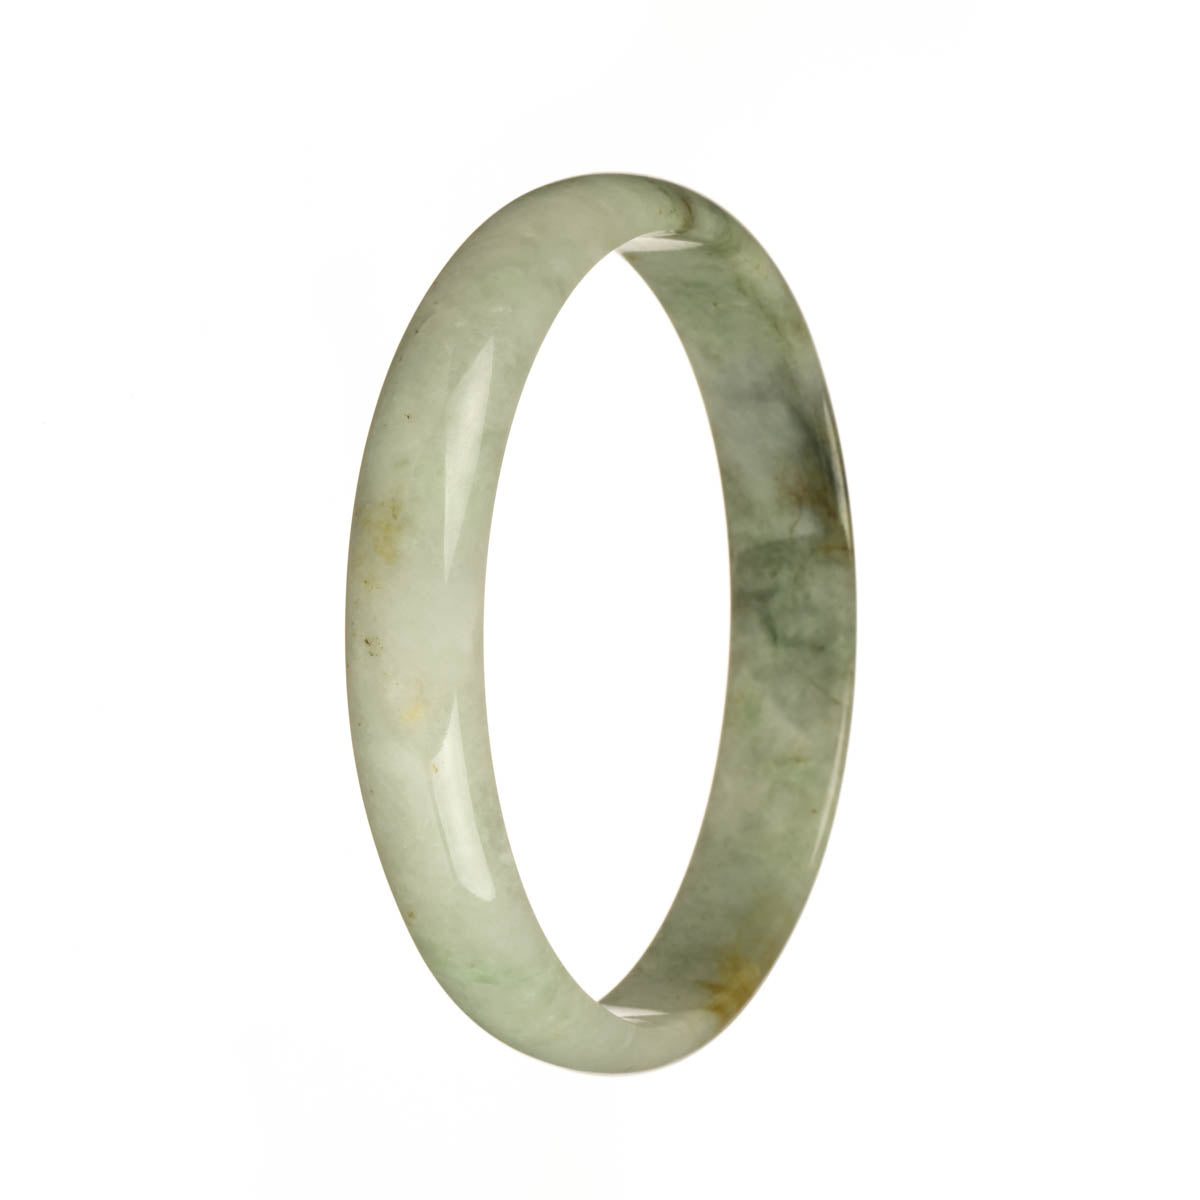 76.2mm White with Olive Green and BrownPatterns Jade Bangle Bracelet